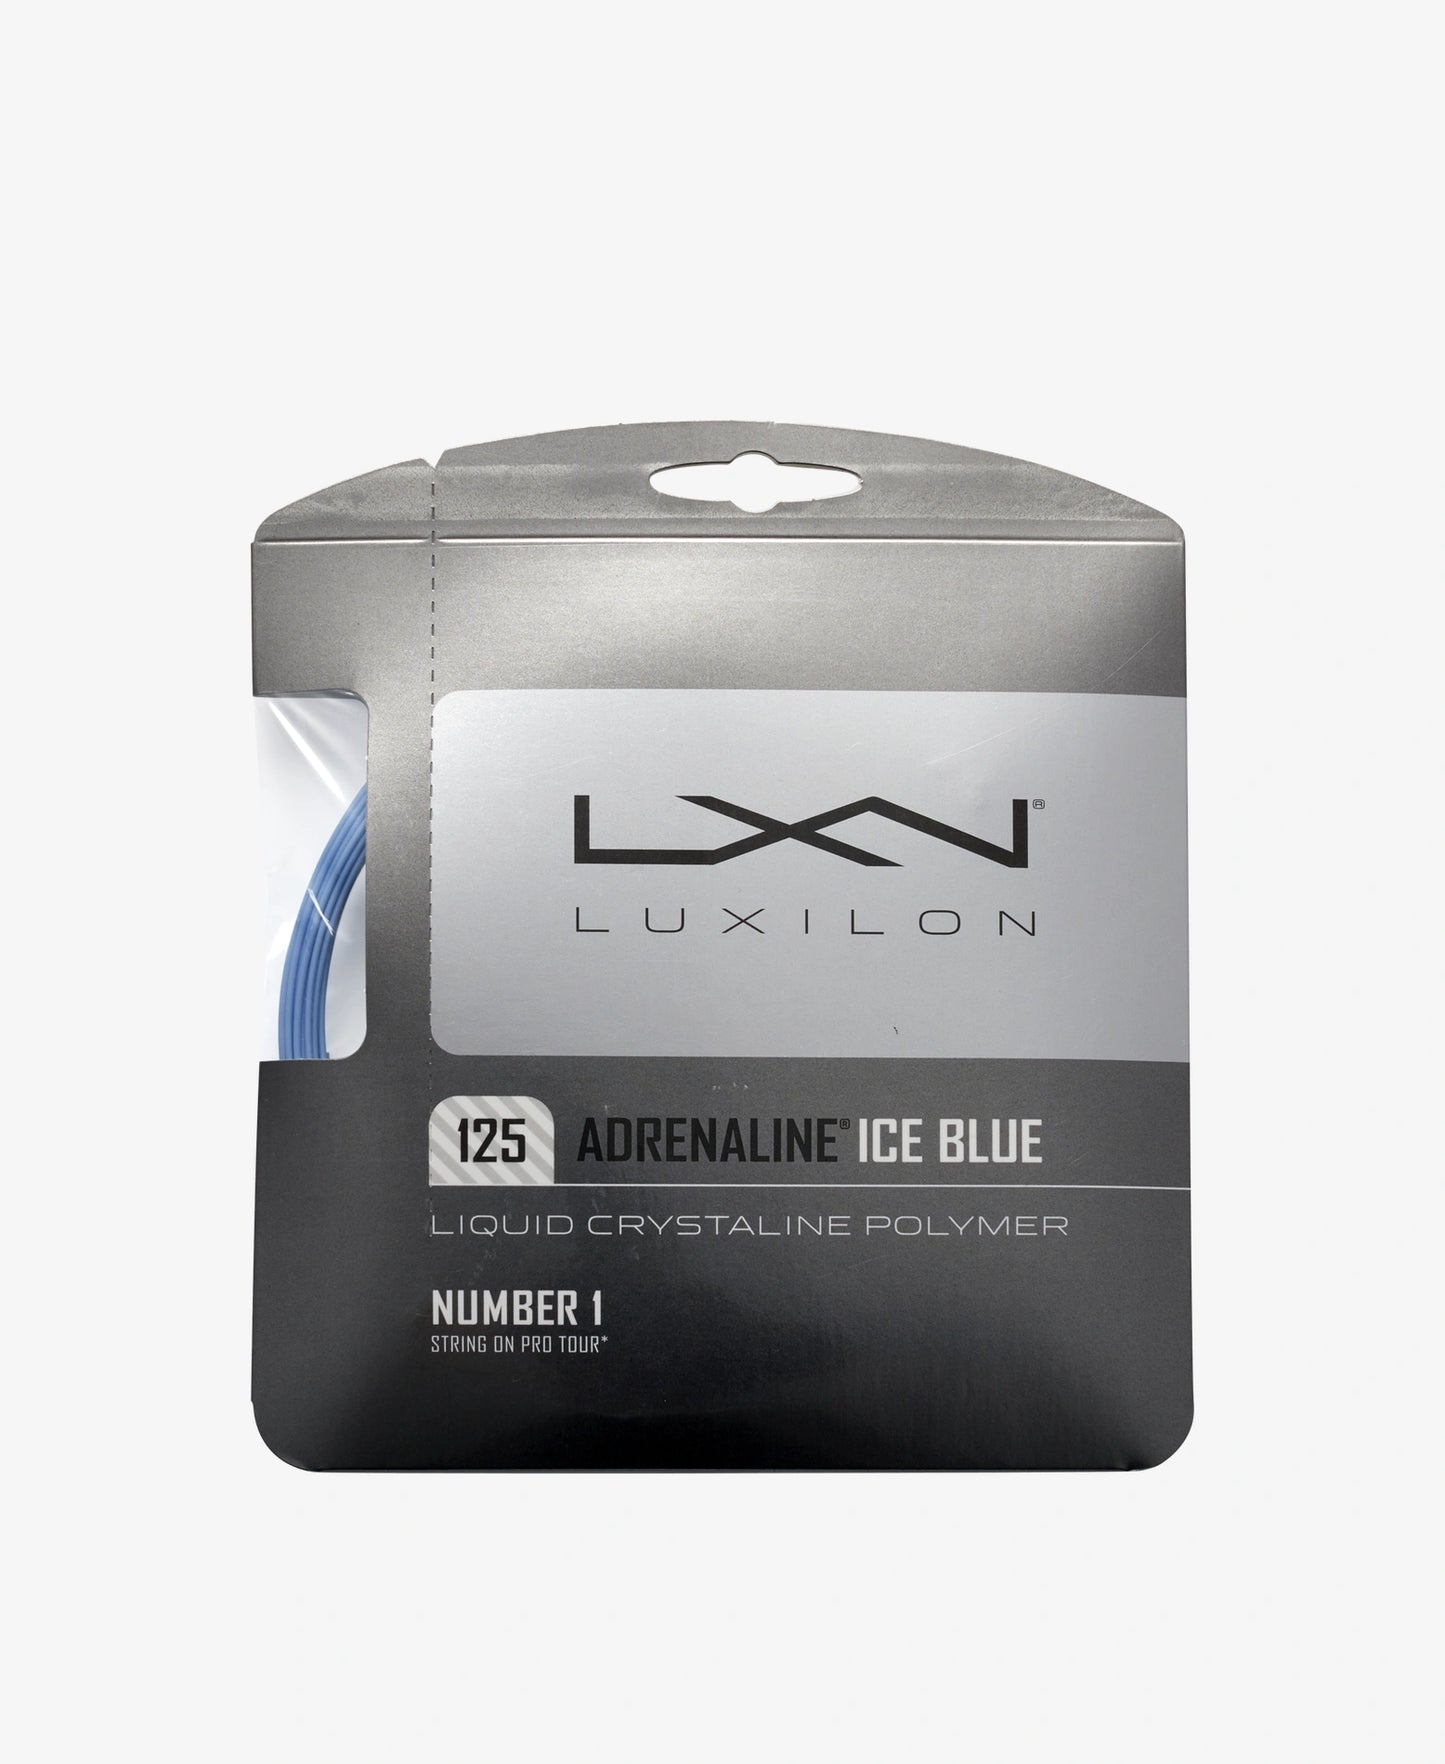 A set of Luxilon Adrenaline 125 tennis String in ice blue colour available for sale at GSM Sports.    